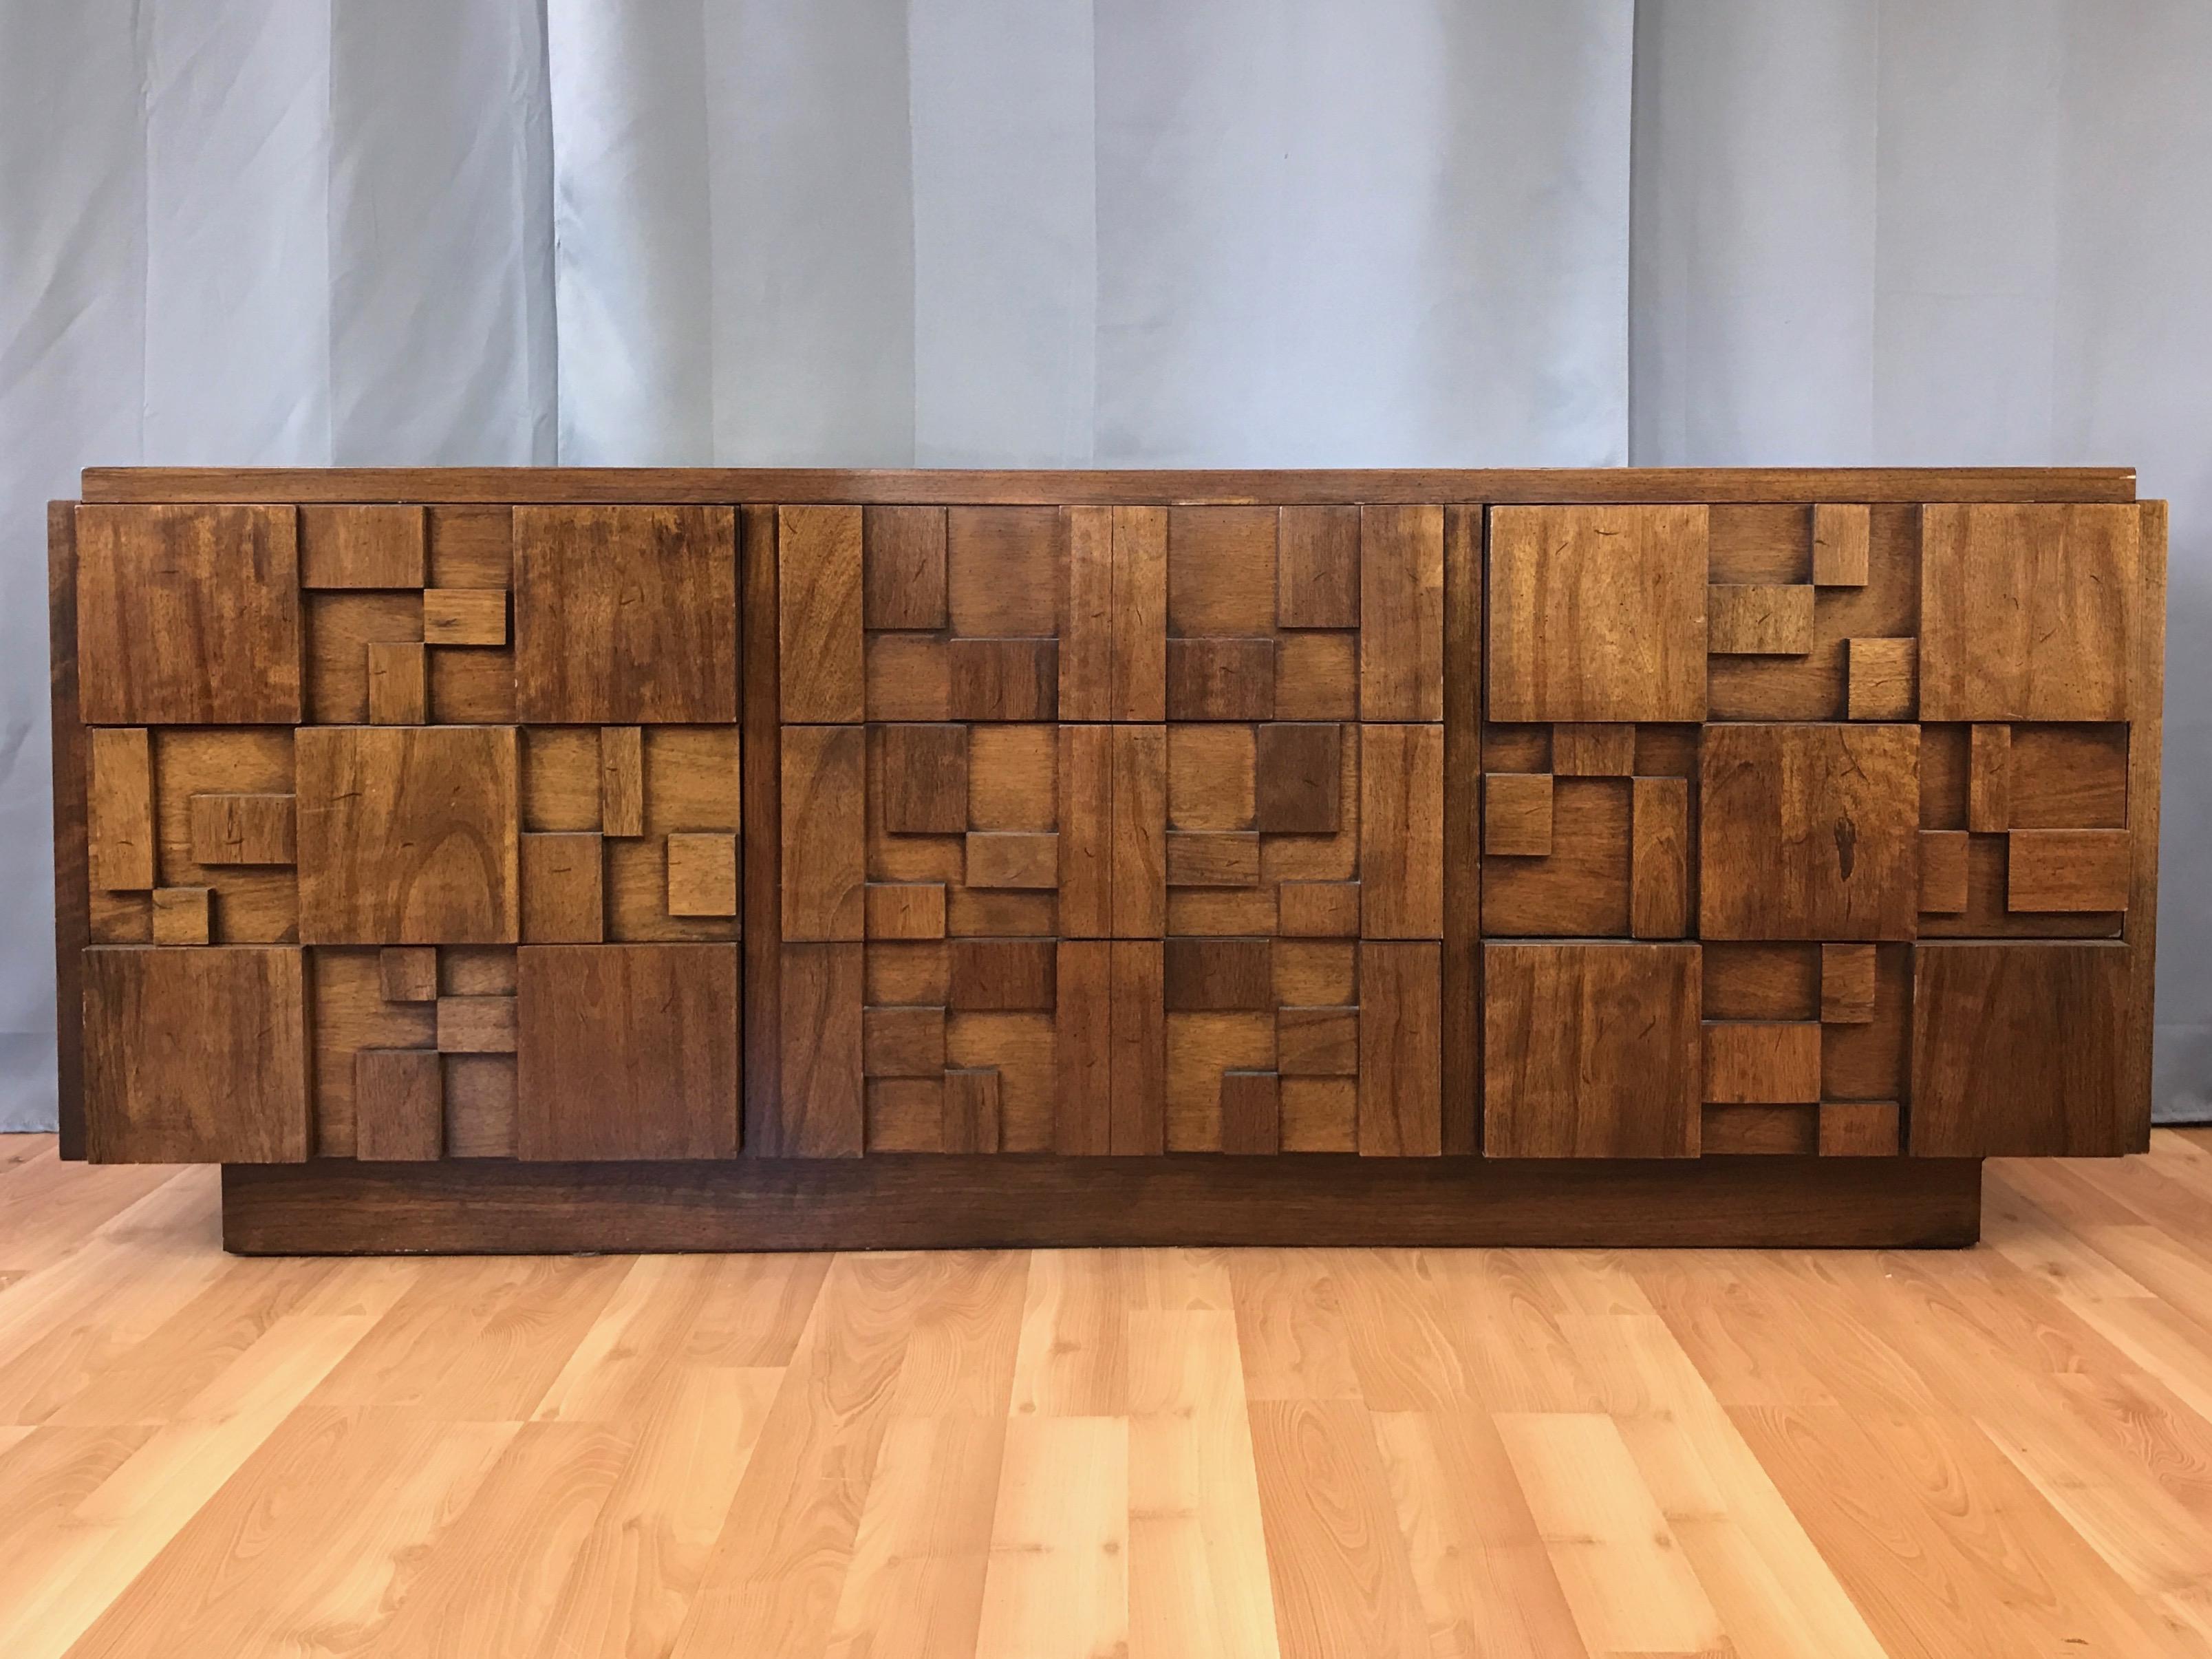 A very substantial Brutalist walnut nine-drawer dresser from Lane’s Mosaic collection.

Shares the blocky architectural aesthetic of Paul Evan’s contemporaneous Cityscape collection, with geometric elements of varied thickness that reveal